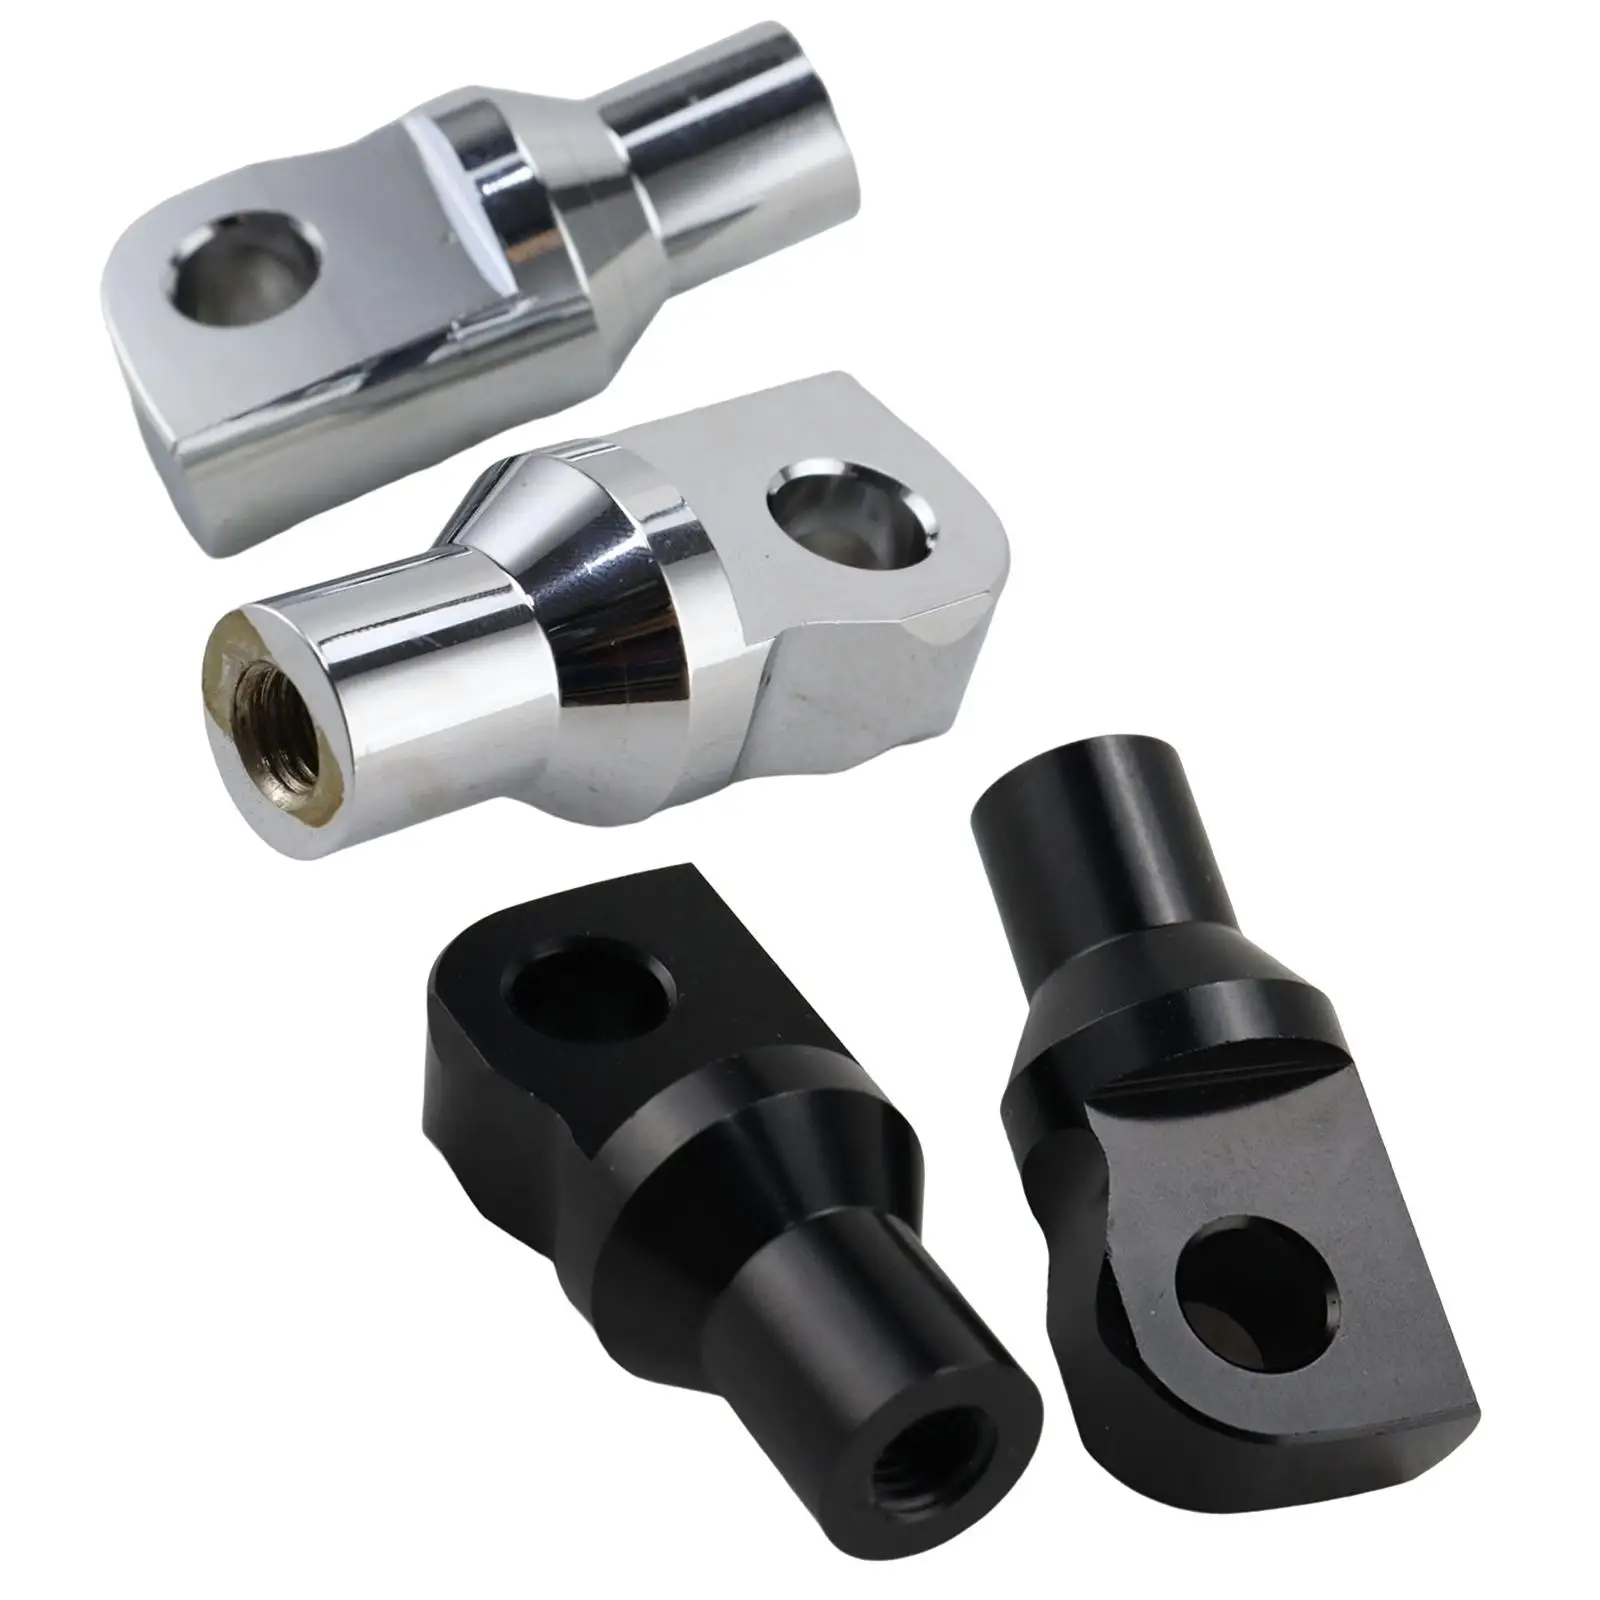 2 Pieces Footpeg Mount Bolt Adapter for Fxdwg Male Pegs Mounting